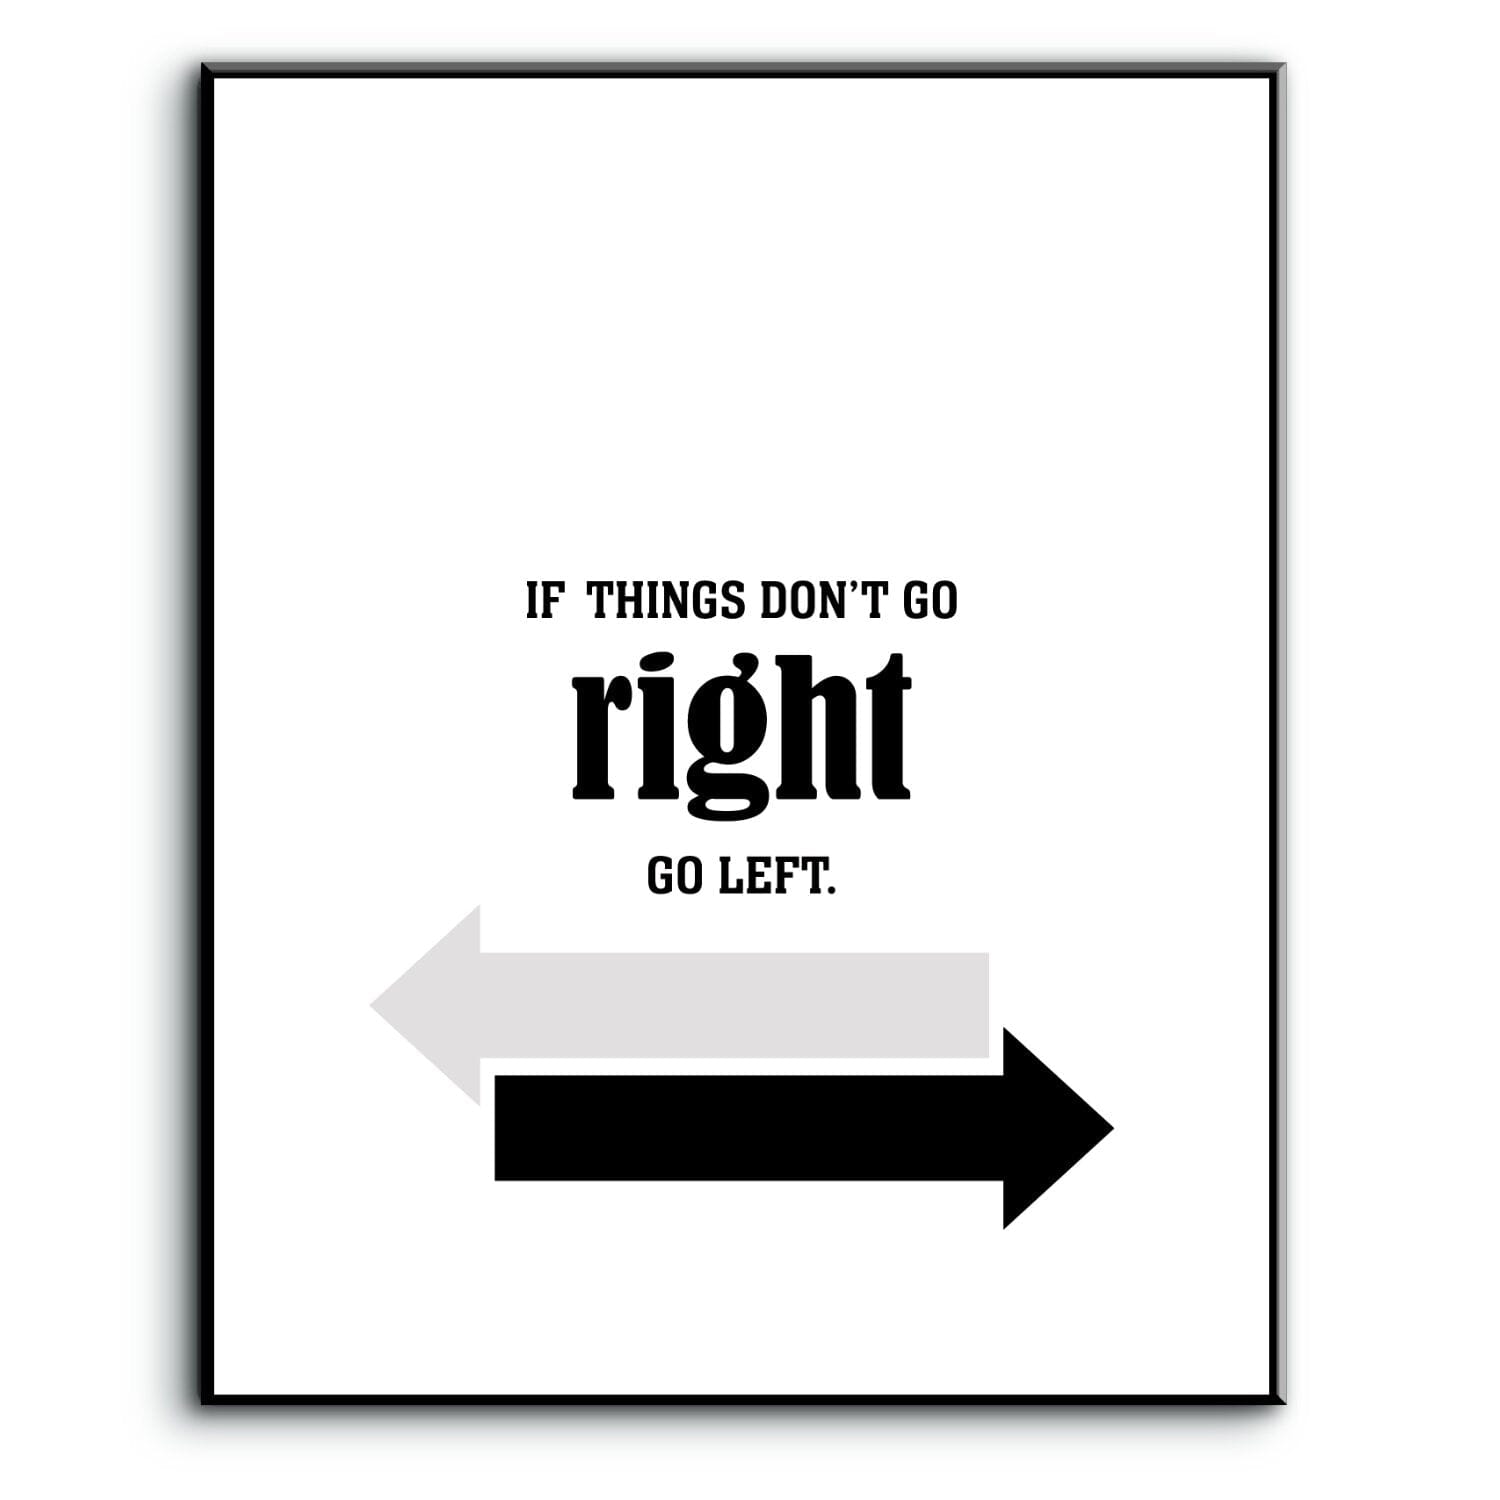 If Things Don't go Right, Go Left - Wise and Witty Word Art Wise and Wiseass Quotes Song Lyrics Art 8x10 Plaque Mount 